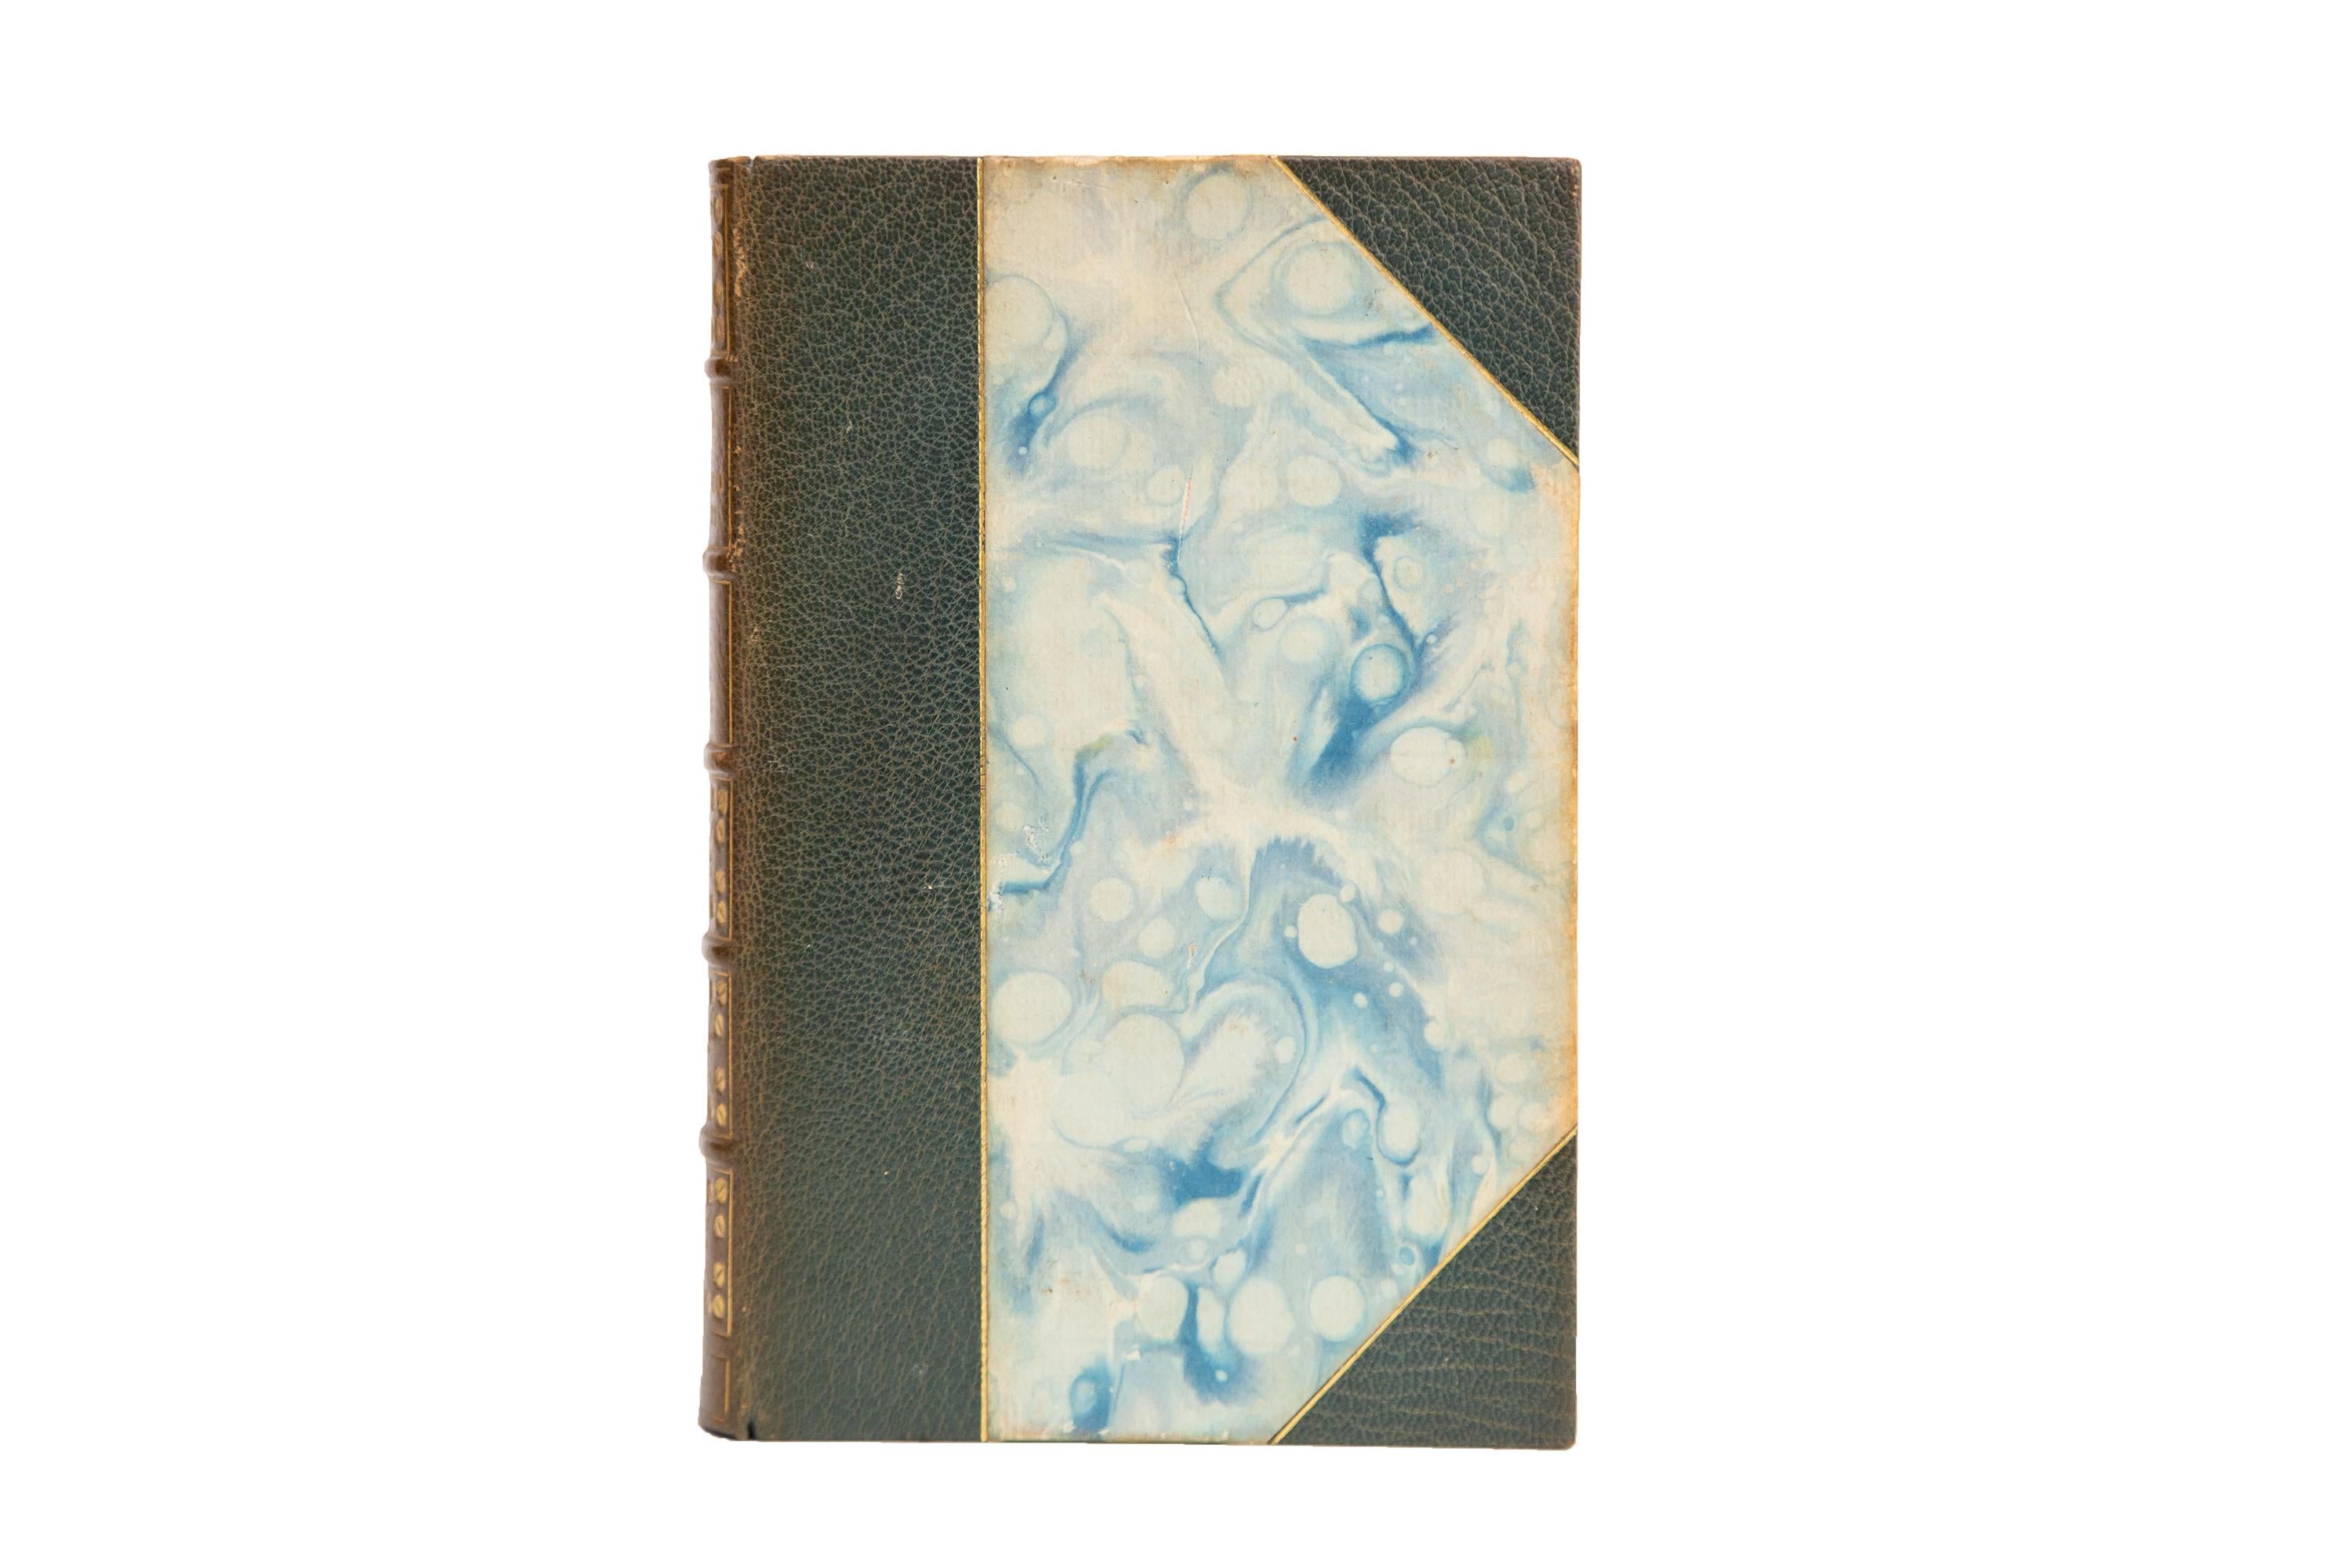 2 Volumes. John Addington Symonds, The Life of Michelangelo Buonarroti. Third Edition. Bound in 3/4 green morocco and marbled boards, bordered in gilt tooling. Raised bands, dotted in gilt tooling with panels displaying borders, floral detailing,